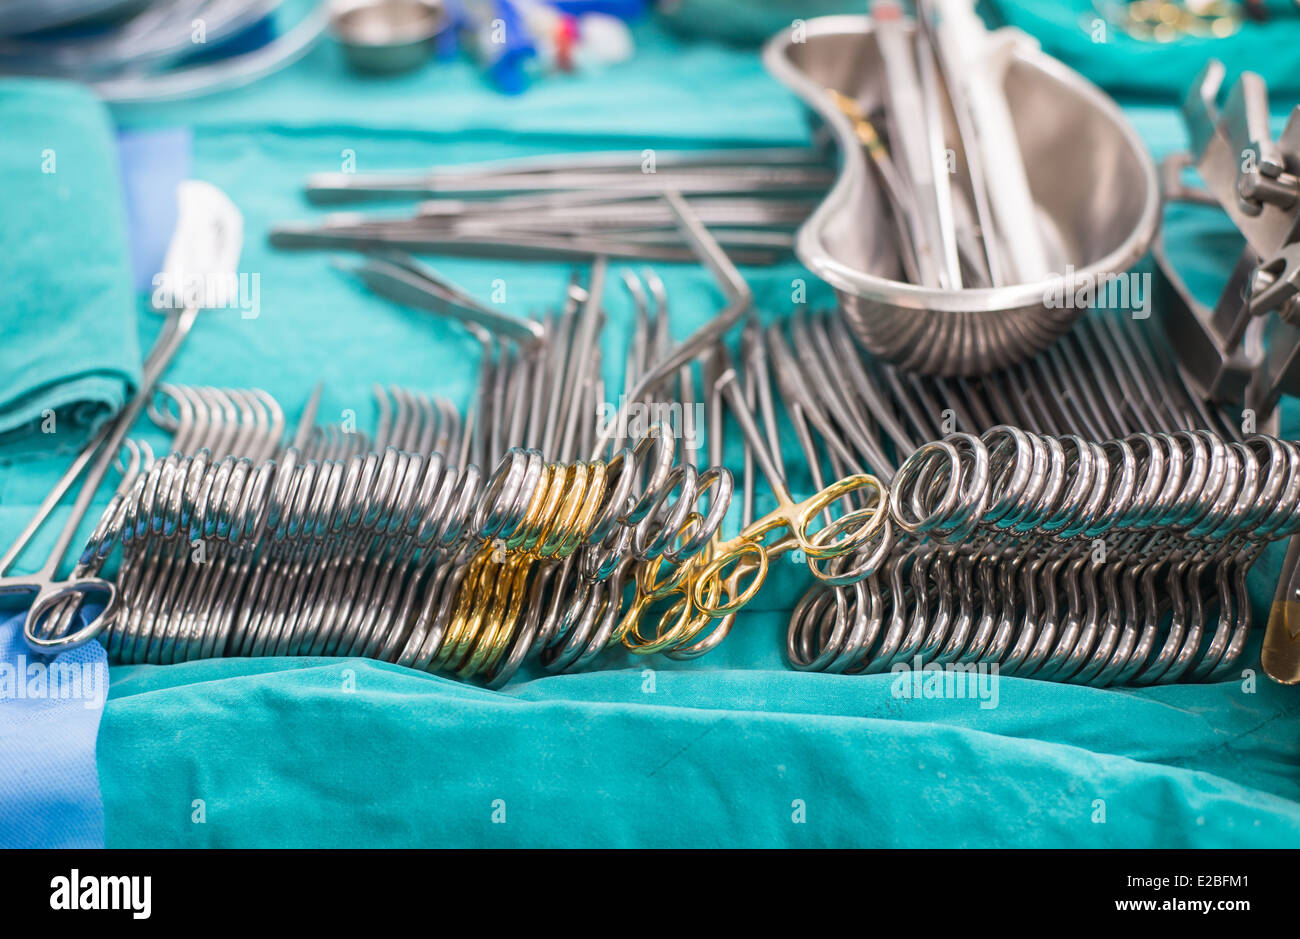 Surgical instruments for open heart surgery Stock Photo